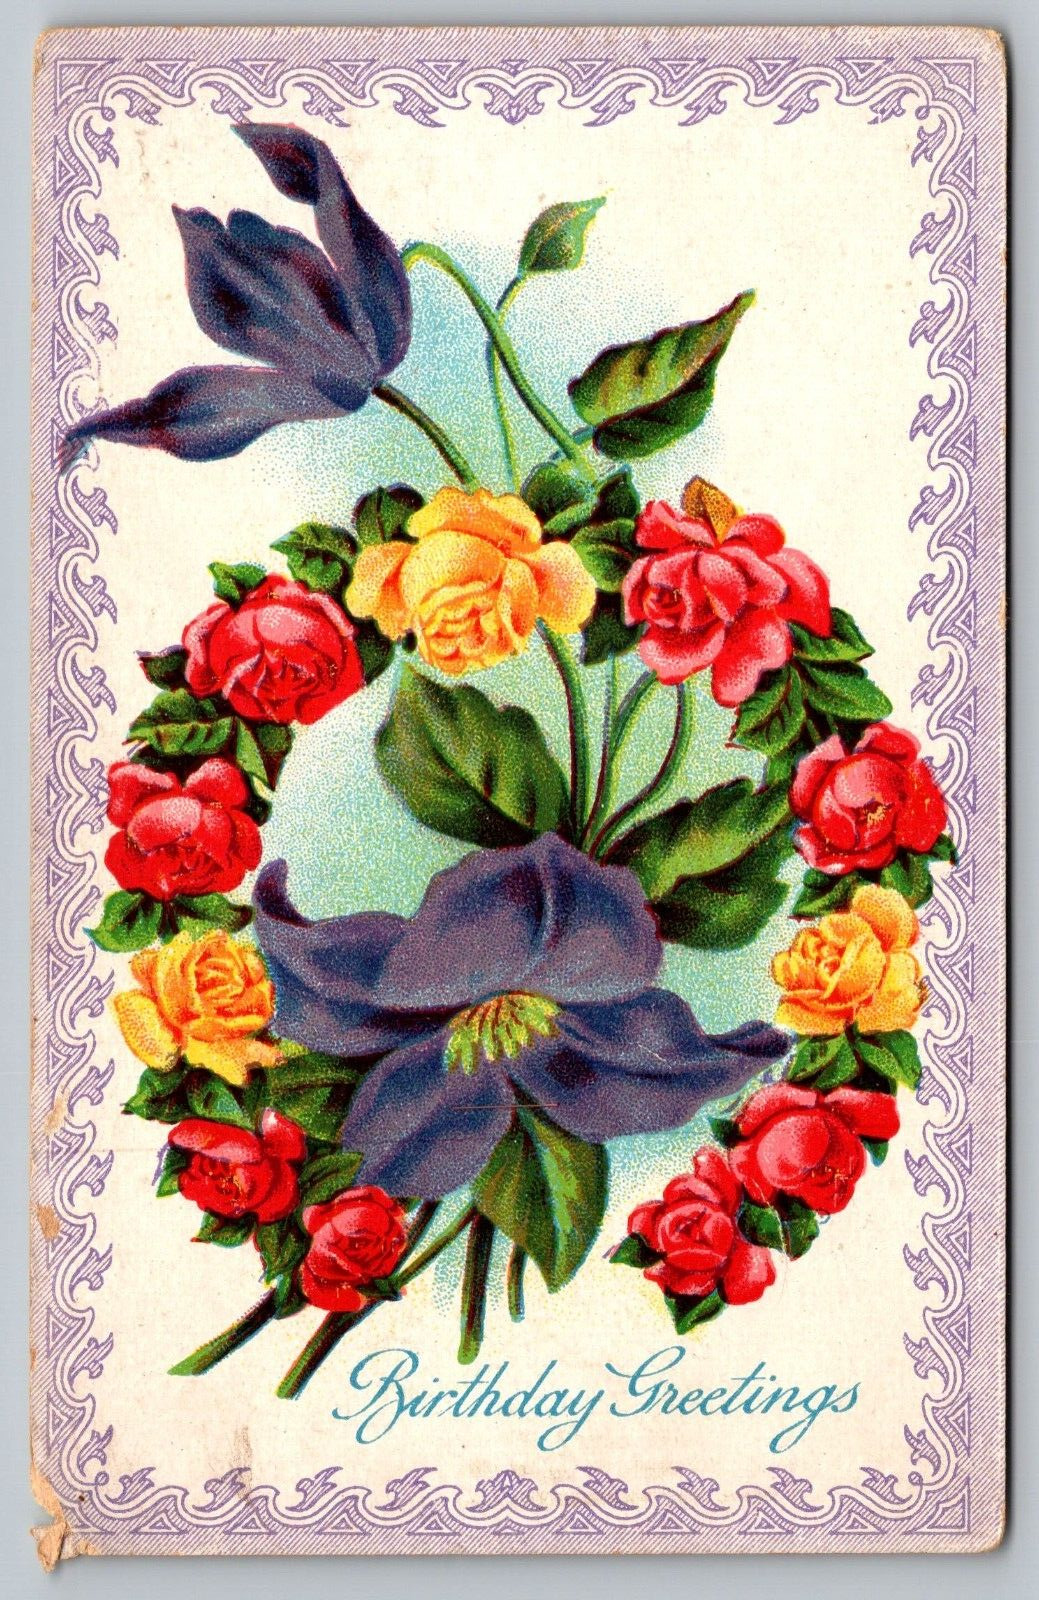 Postcard A Birthday Greeting With A Colorful Floral Design VTG c1910 H17